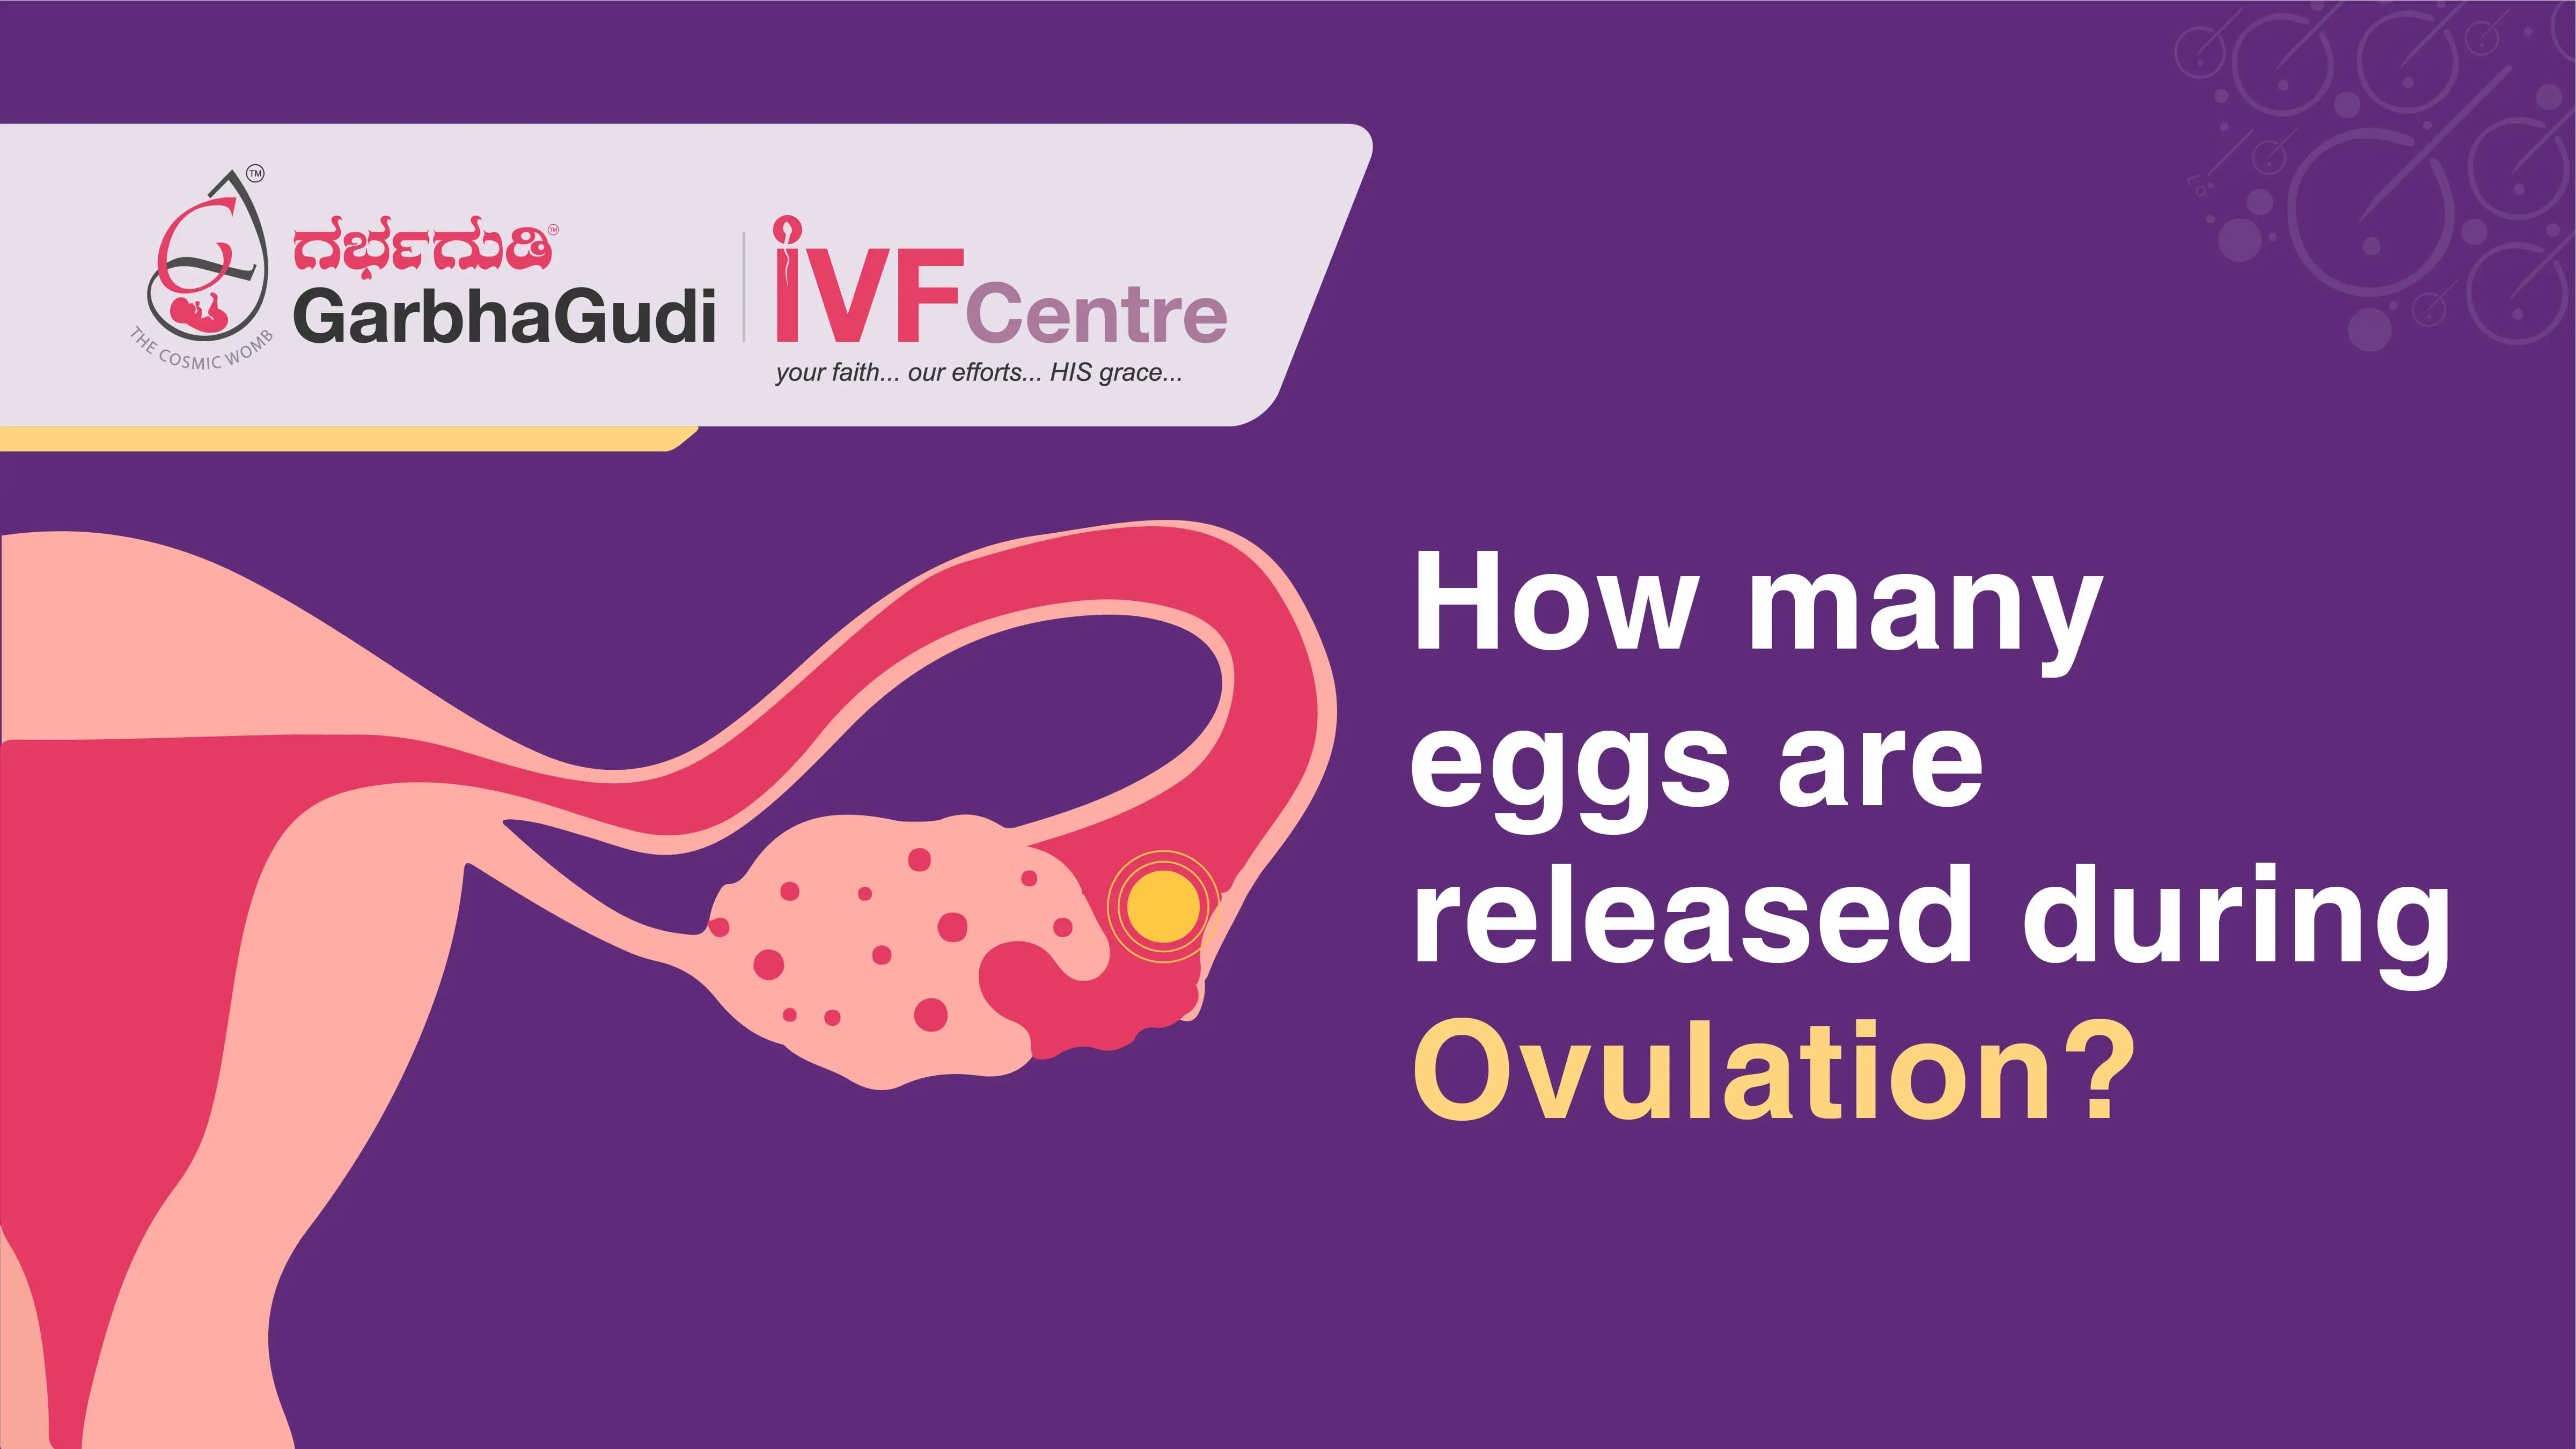 How many eggs are released during ovulation?